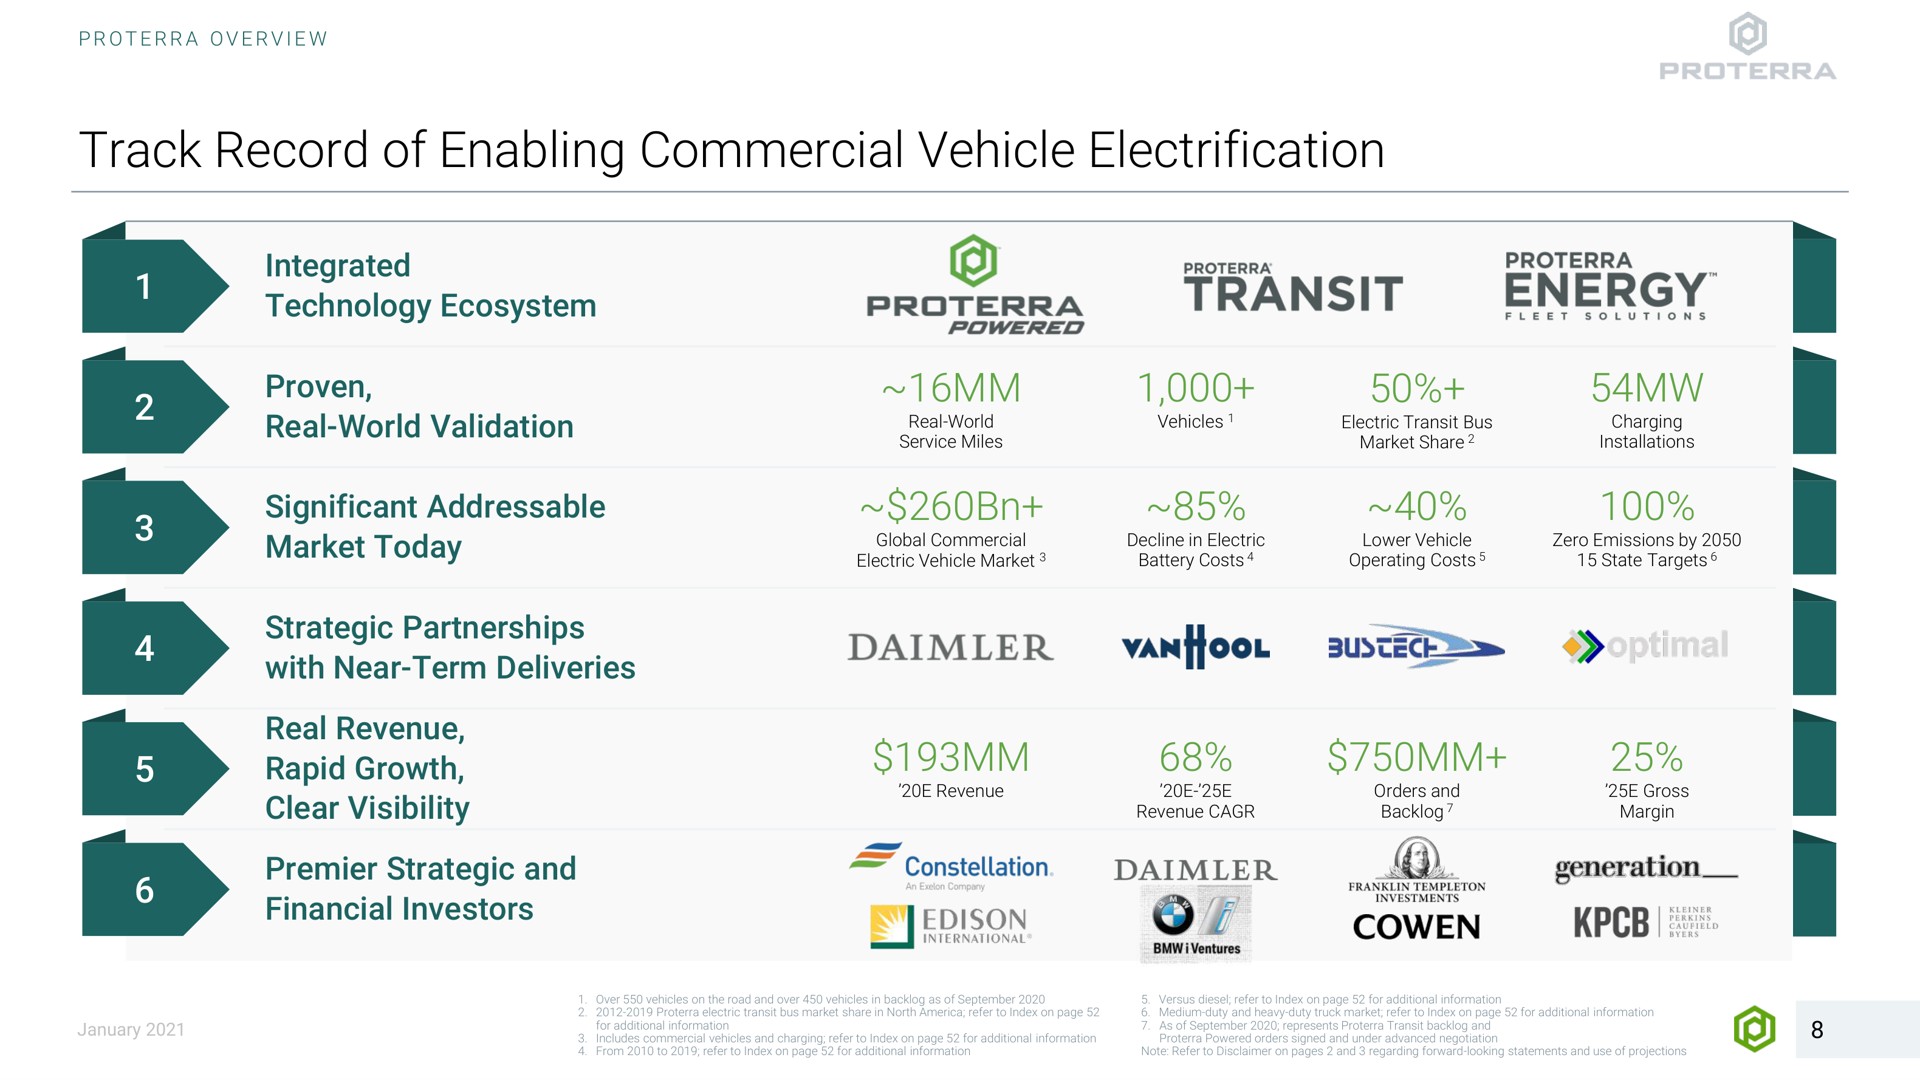 track record of enabling commercial vehicle electrification integrated technology ecosystem proven real world validation service miles transit market share installations significant market today electric market battery costs operating costs state targets strategic partnerships with near term deliveries real revenue clear visibility premier strategic and financial investors revenue backlog margin constellation eastern generation | Proterra